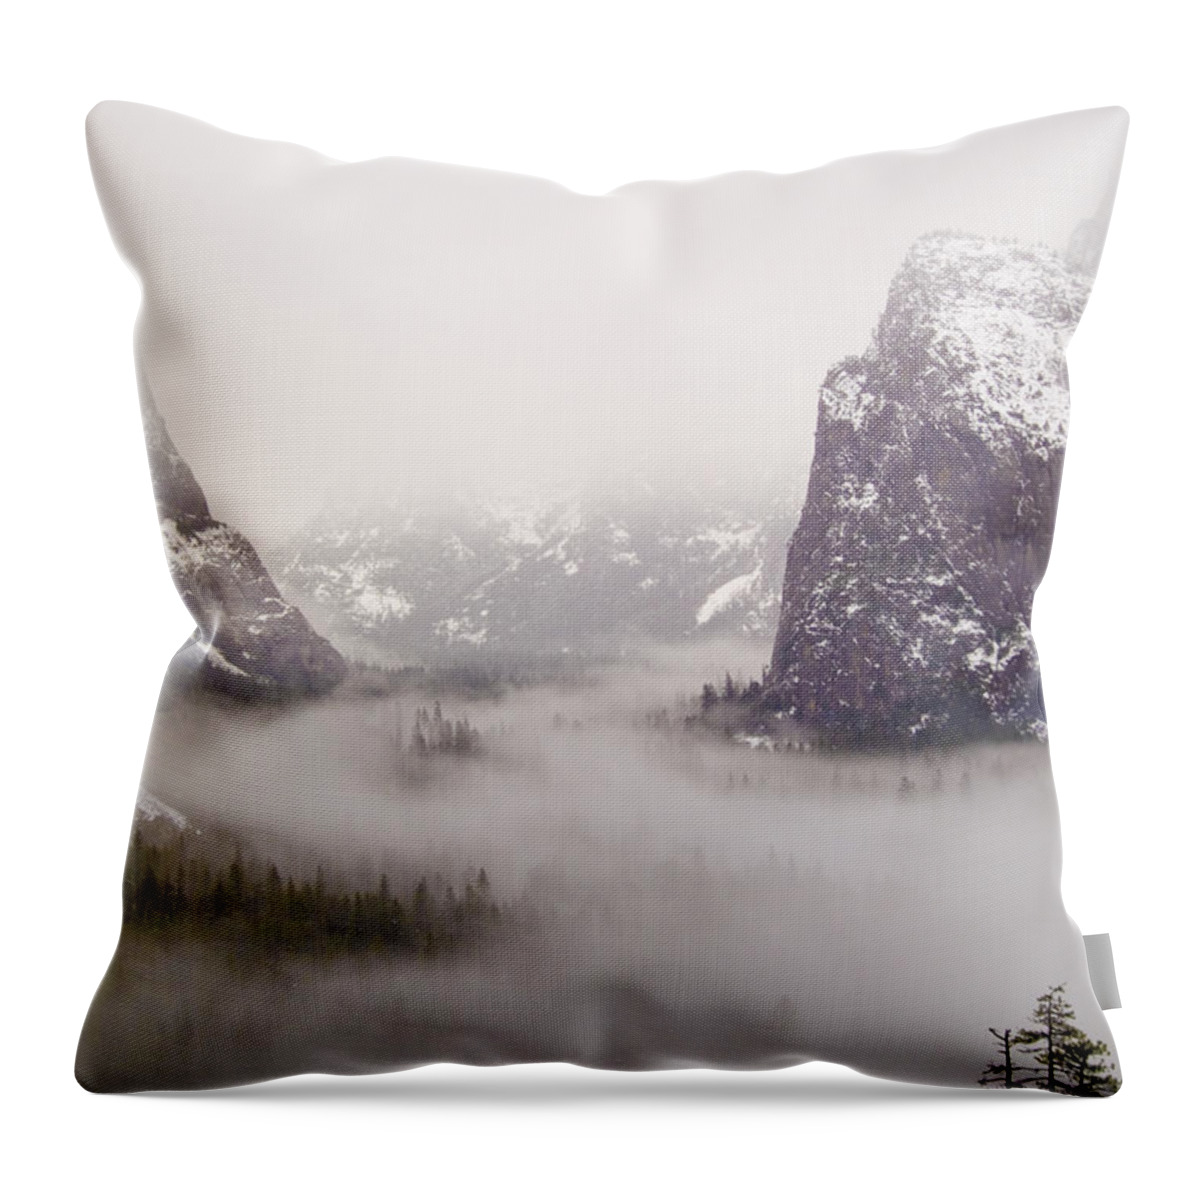  Throw Pillow featuring the photograph Storm Brewing by Bill Gallagher